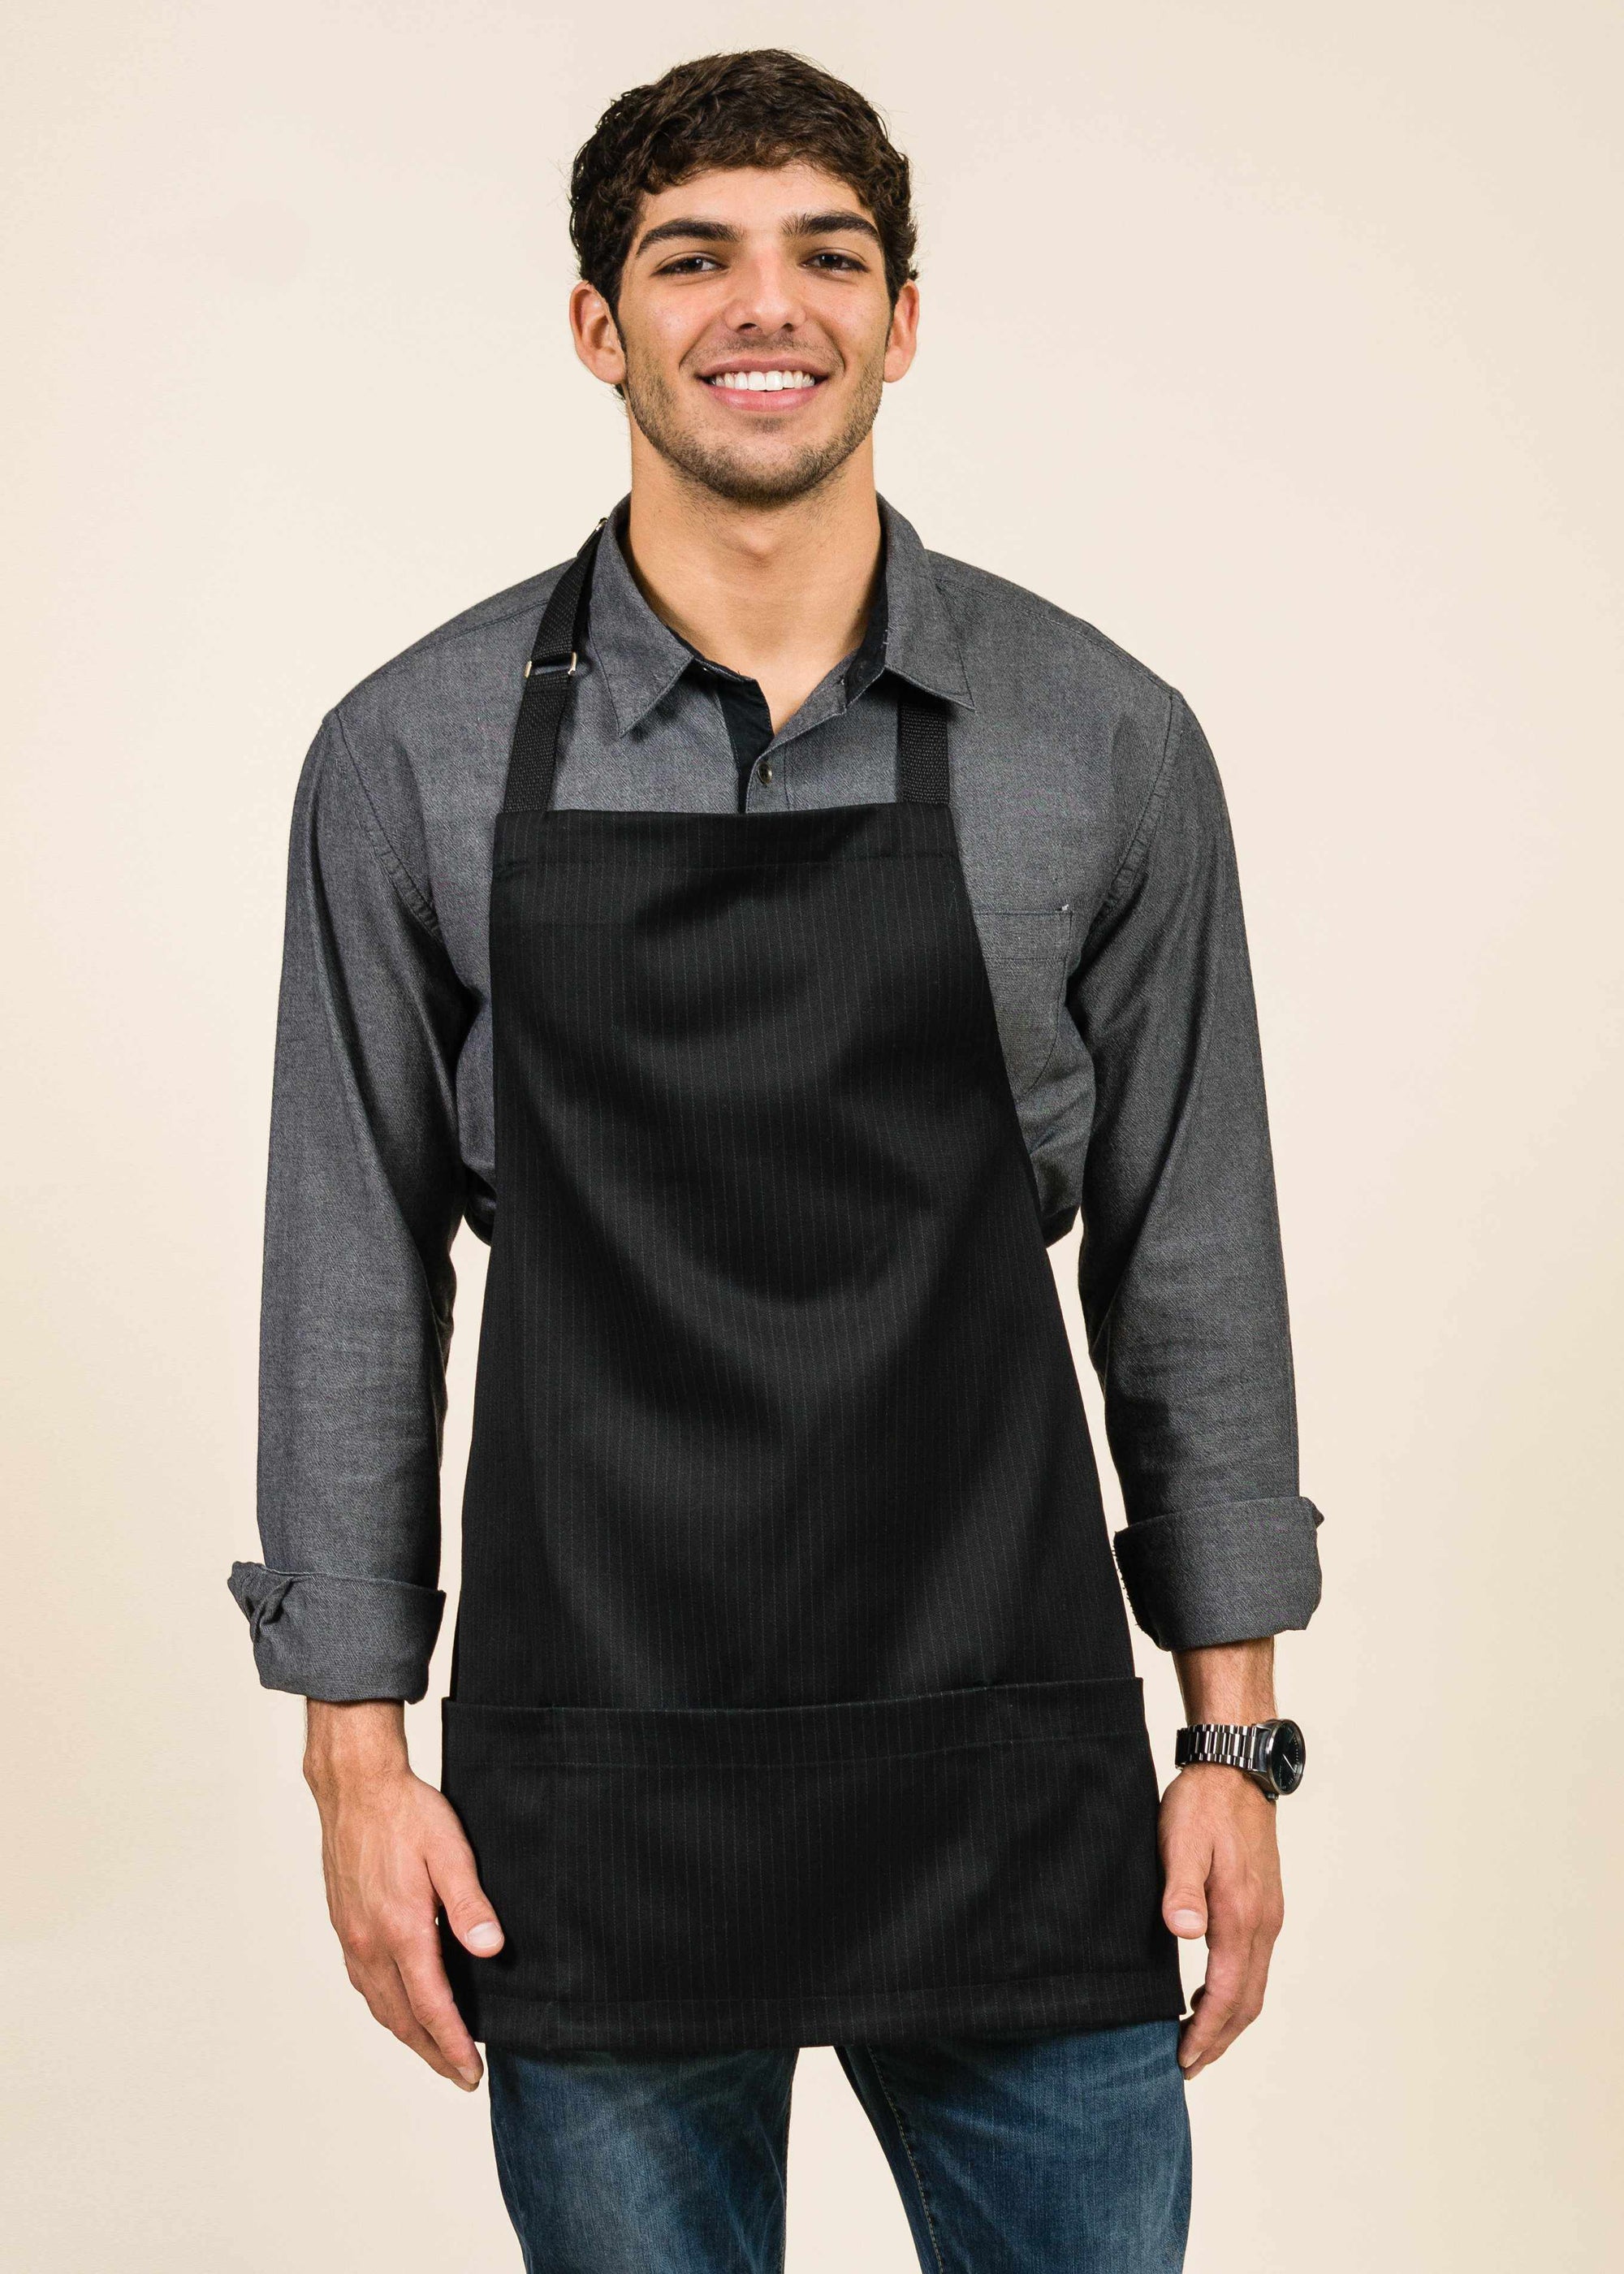 Short Full Black Apron with Pinstripes